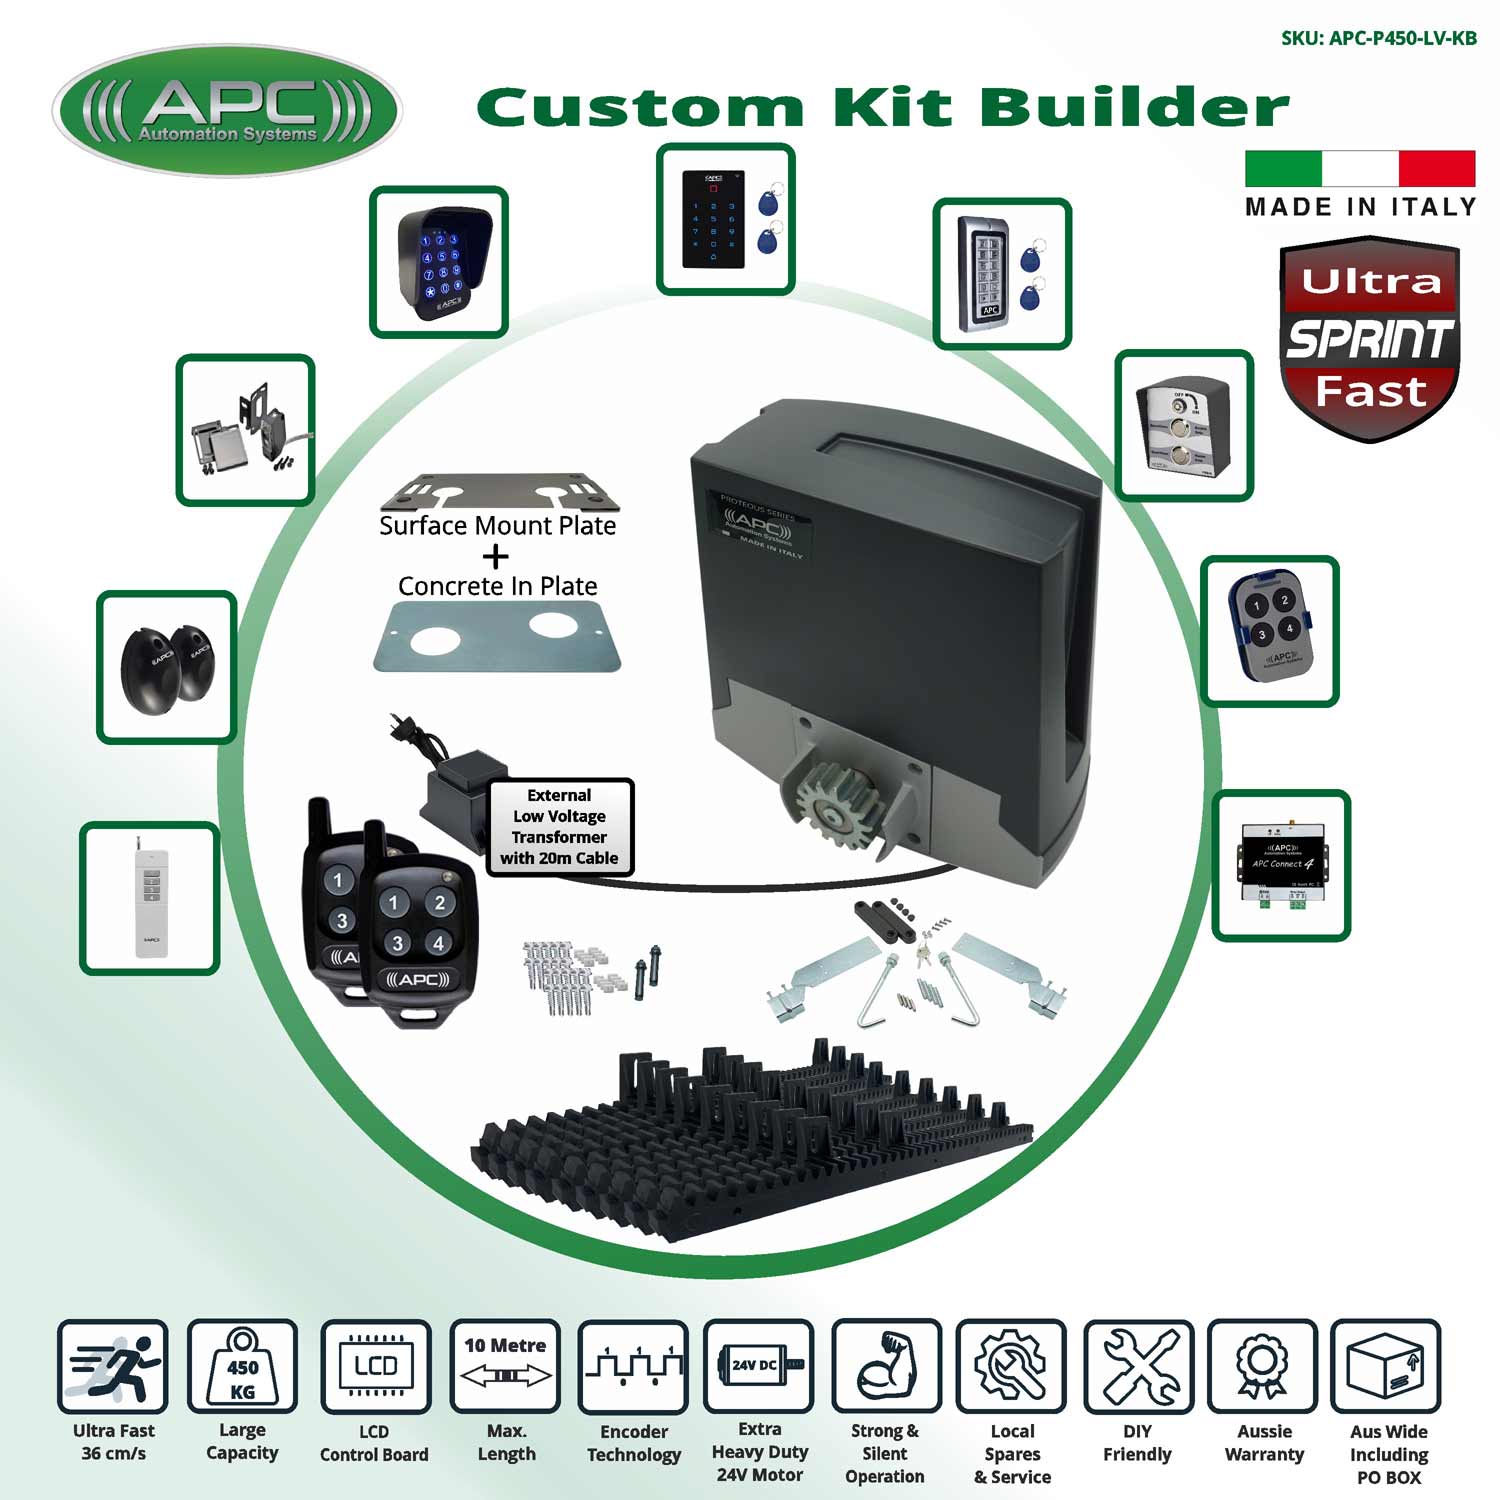 APC Gate Automation Proteous 450 Extra Heavy Duty ULTRA FAST Sliding Gate Opener Kit